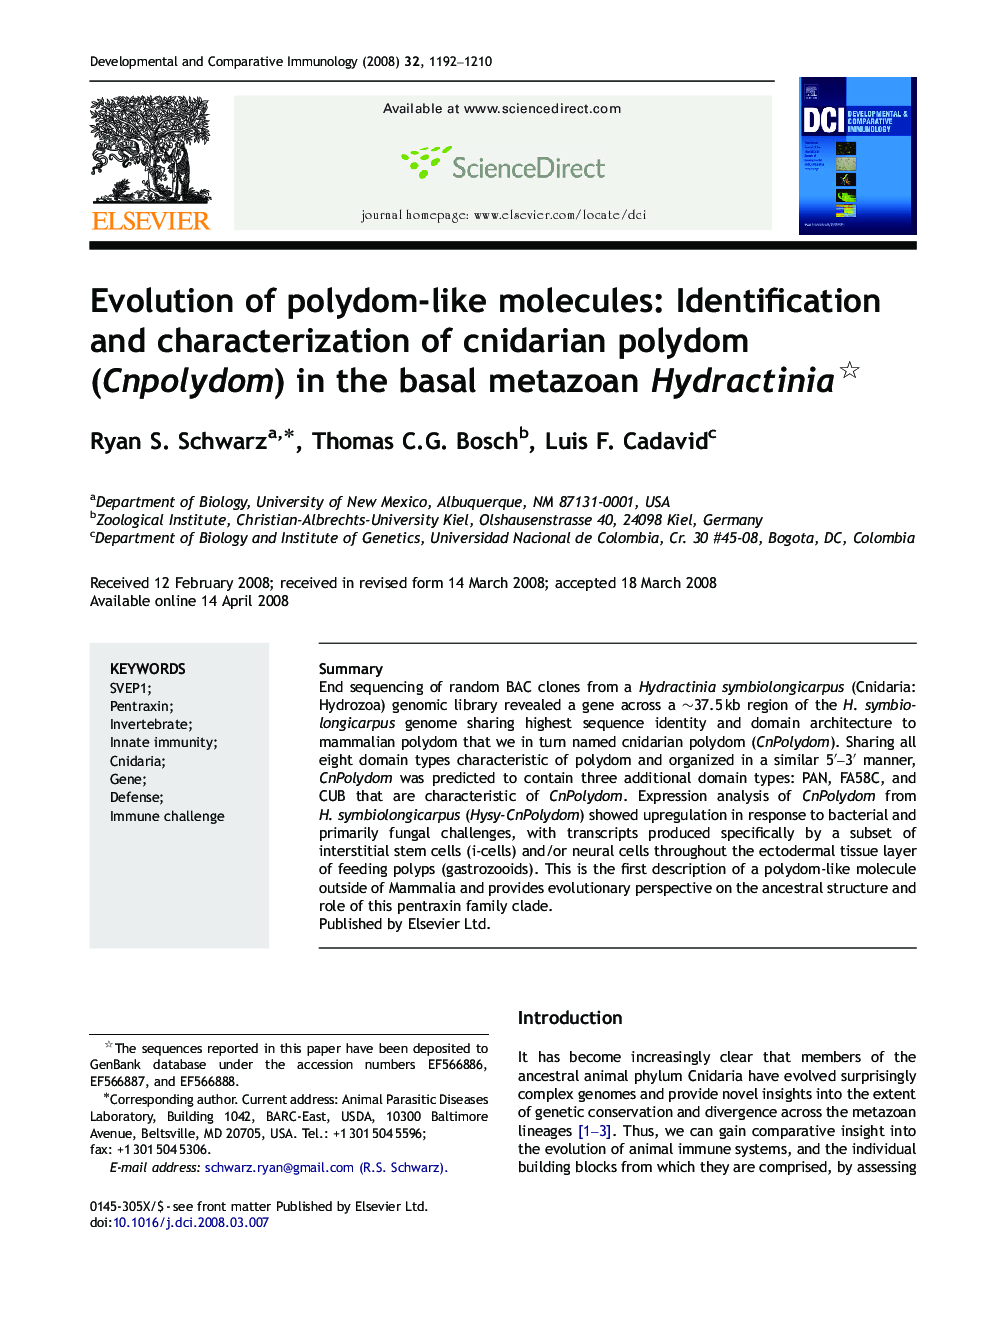 Evolution of polydom-like molecules: Identification and characterization of cnidarian polydom (Cnpolydom) in the basal metazoan Hydractinia 